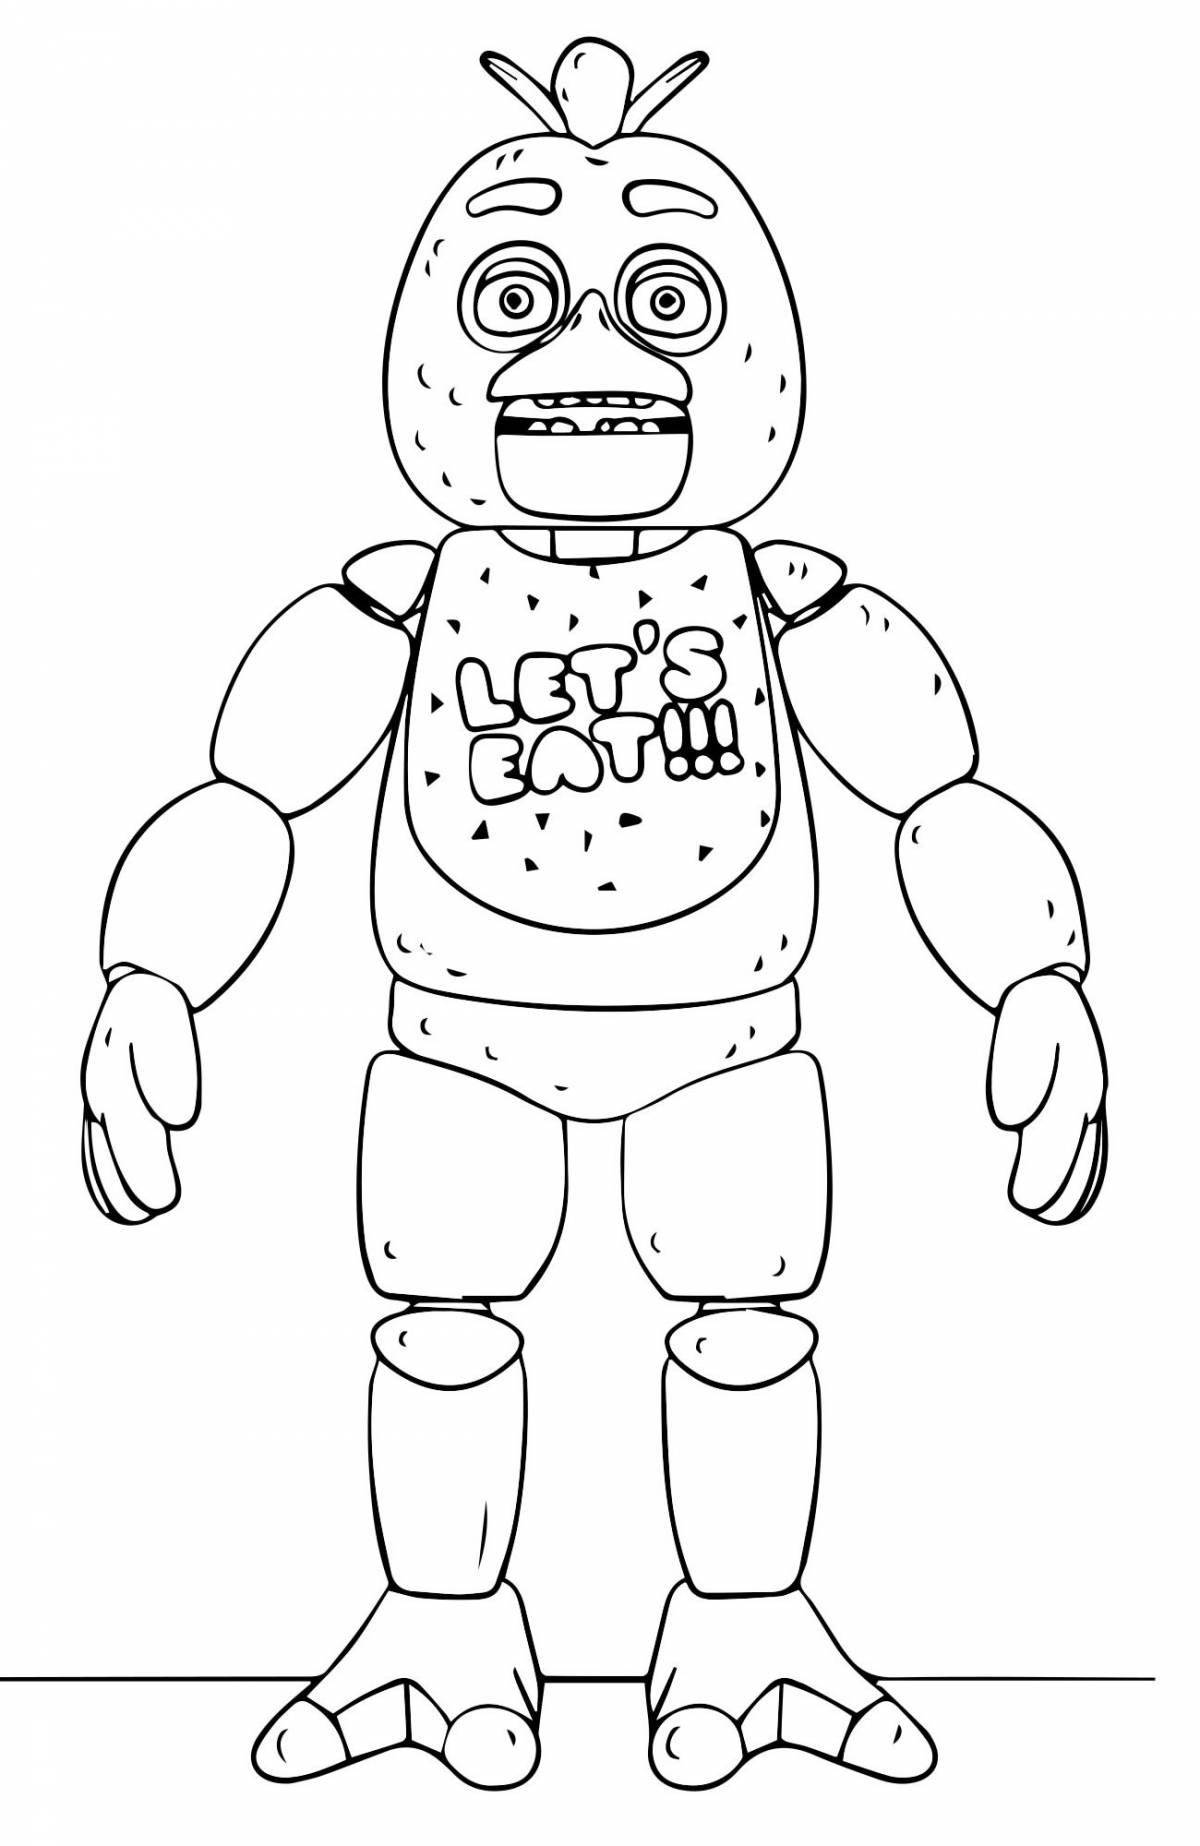 Lovely coloring moon animatronic